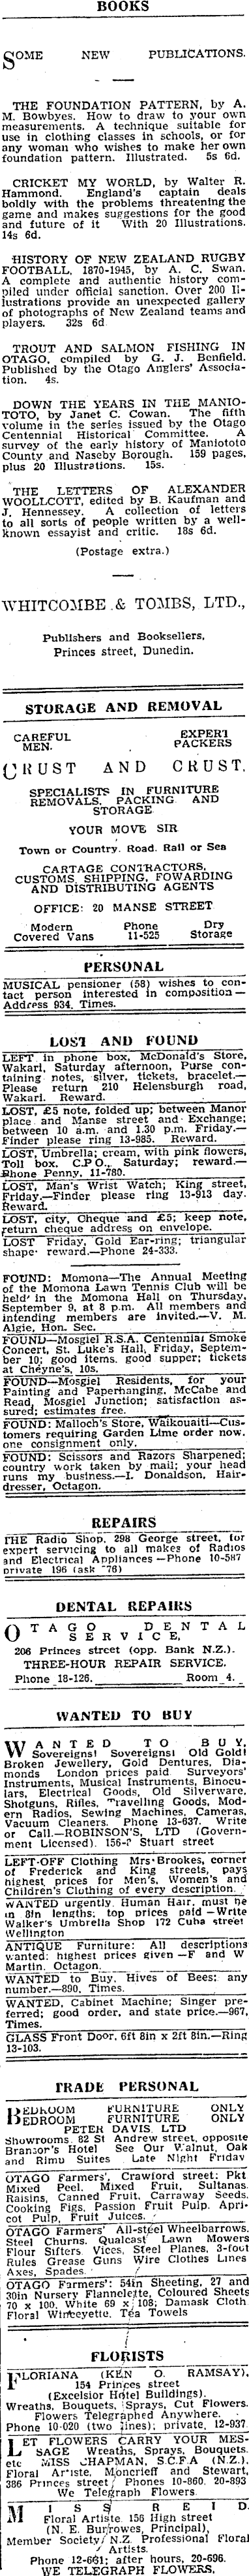 Papers Past Newspapers Otago Daily Times 6 September 1948 Page 1 Advertisements Column 2